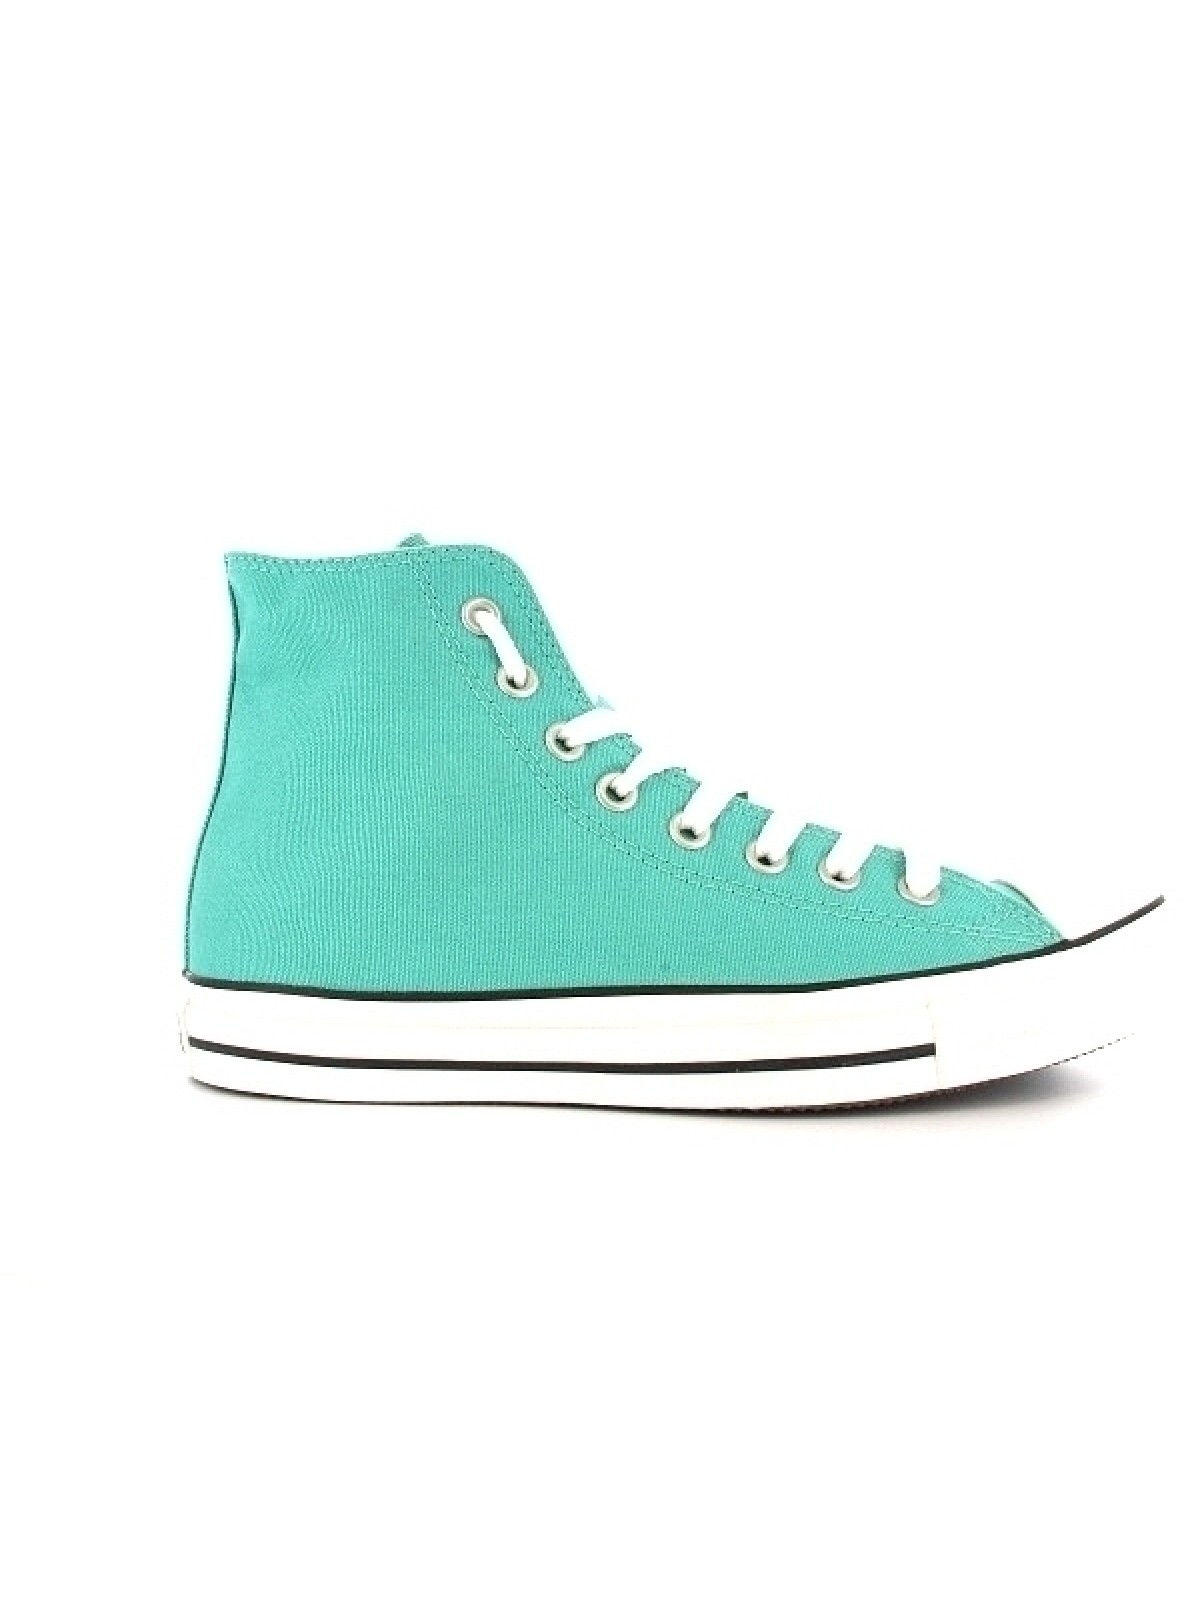 converse all star basse turquoise